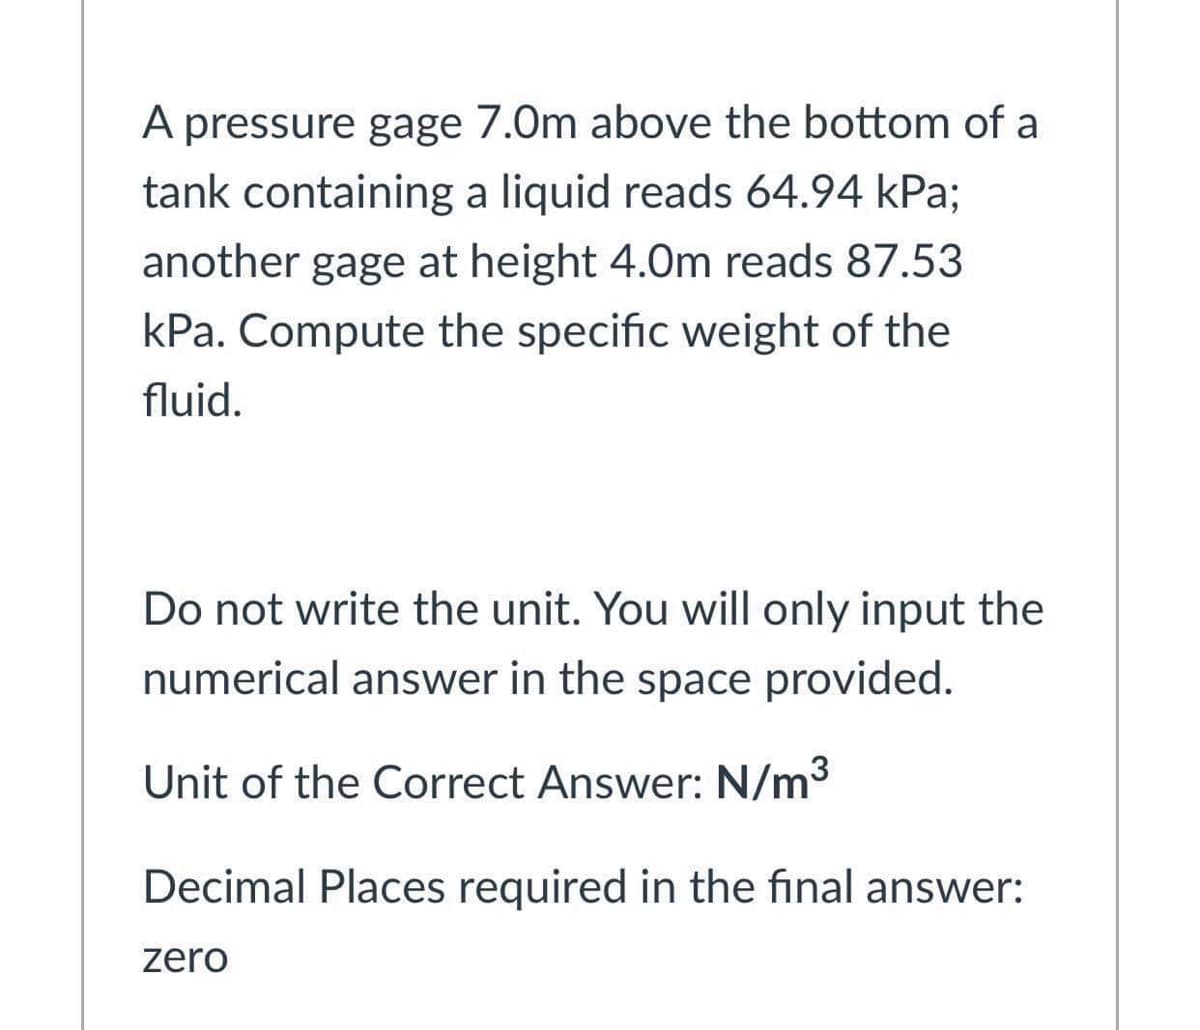 A pressure gage 7.0m above the bottom of a
tank containing a liquid reads 64.94 kPa;
another gage at height 4.0m reads 87.53
kPa. Compute the specific weight of the
fluid.
Do not write the unit. You will only input the
numerical answer in the space provided.
Unit of the Correct Answer: N/m3
Decimal Places required in the final answer:
zero
